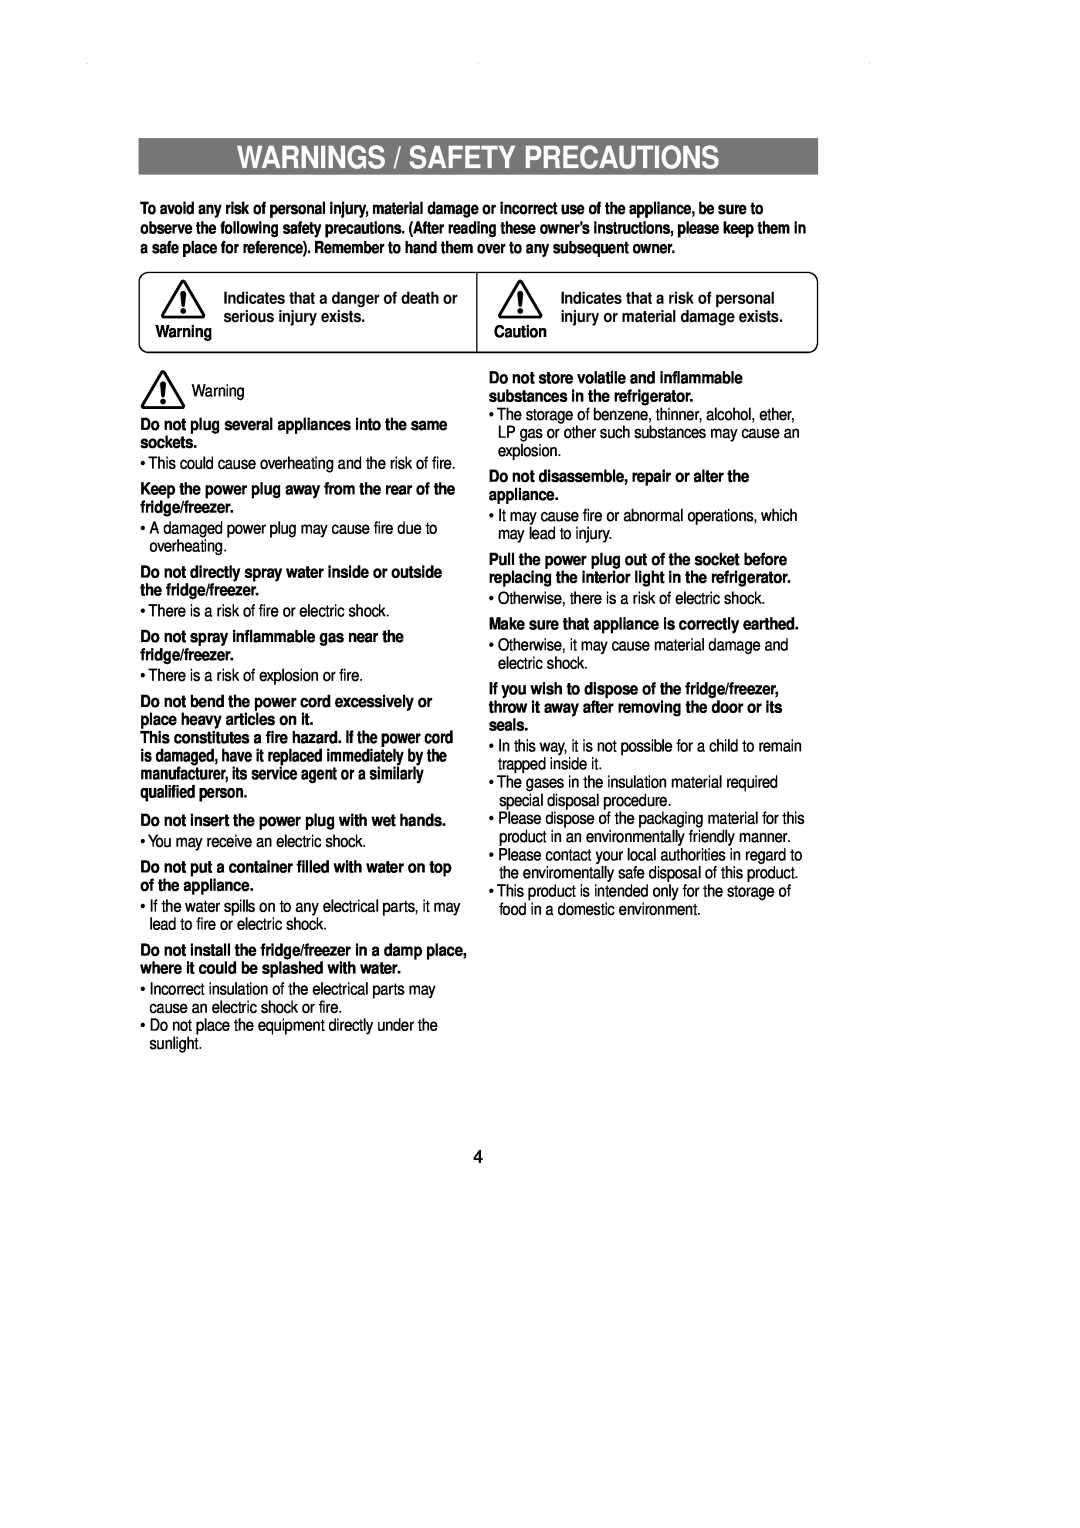 Samsung DA99-00743A Warnings / Safety Precautions, Indicates that a danger of death or serious injury exists. Warning 